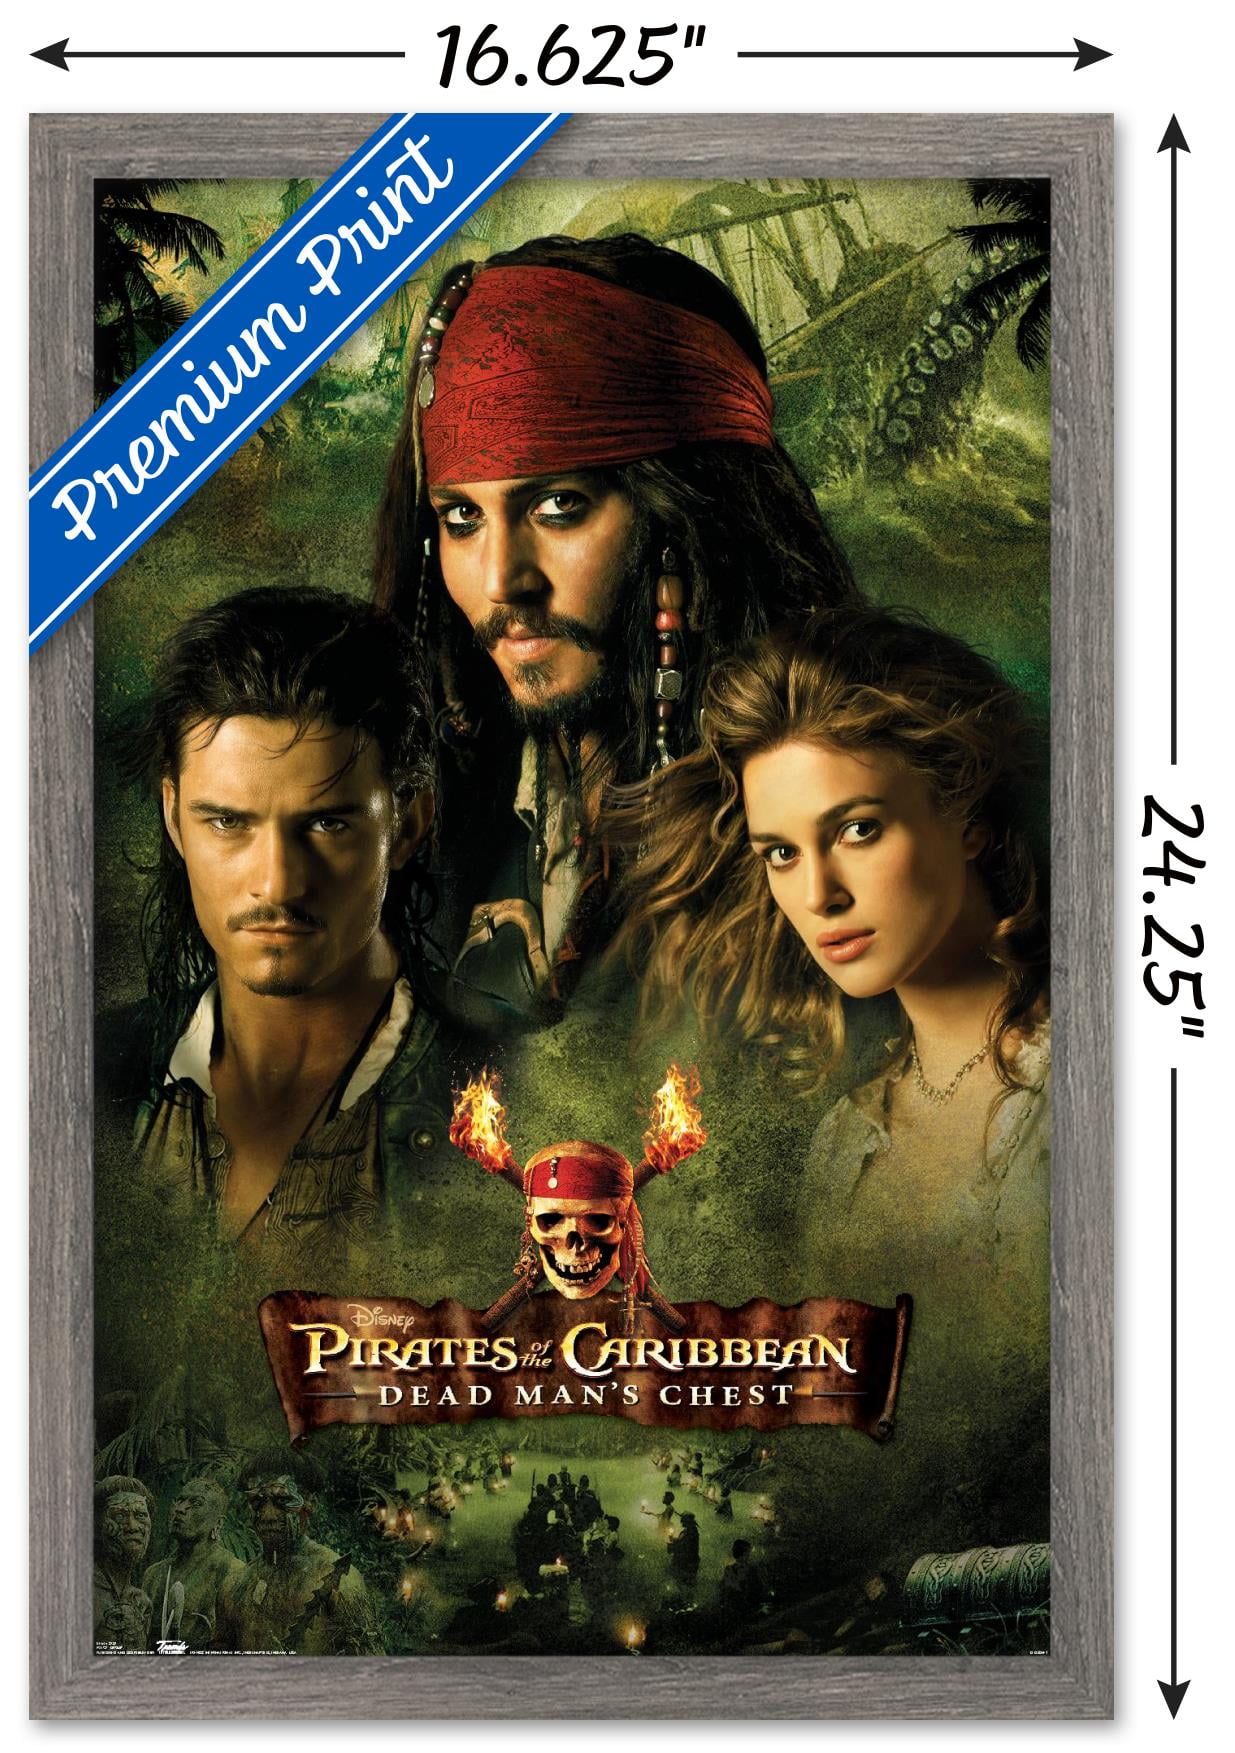 PIRATES OF CARIBBEAN 2 ~ DEAD MAN'S CHEST JACK & WILL BACK TO BACK 24x36 POSTER 